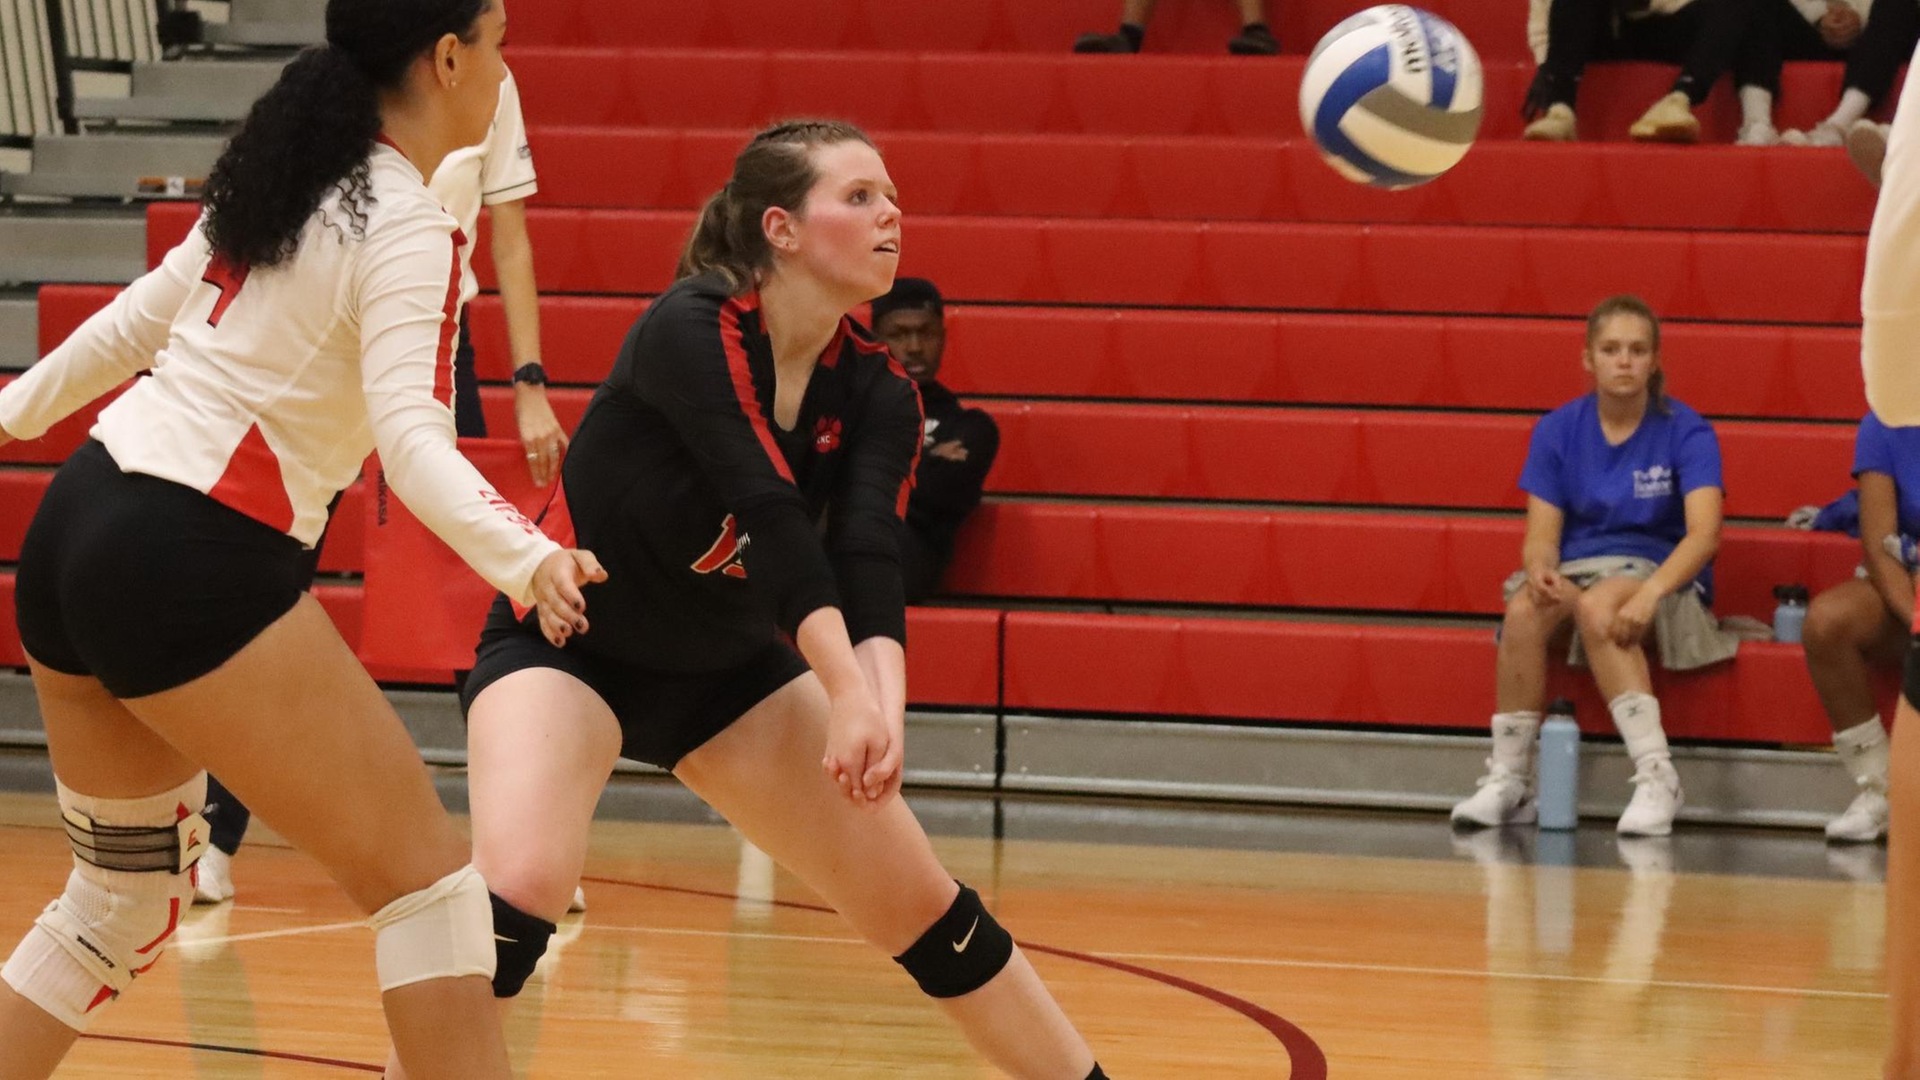 Women’s Volleyball Tripped Up by Wentworth, 3-0